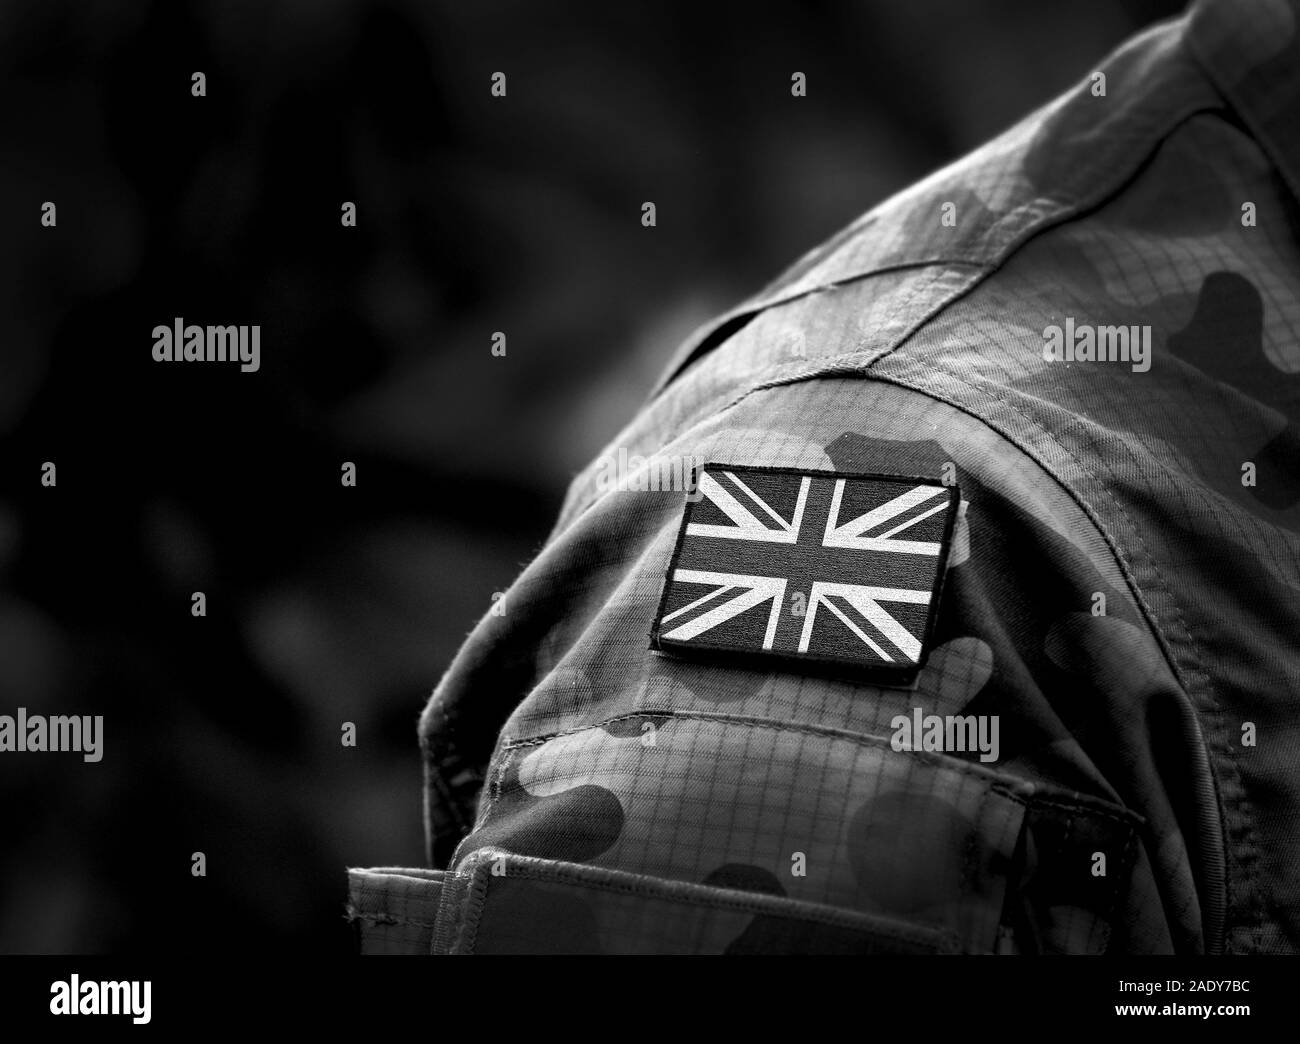 Flag of United Kingdom on military uniform. UK Army. British Armed Forces, soldiers. Collage. Stock Photo